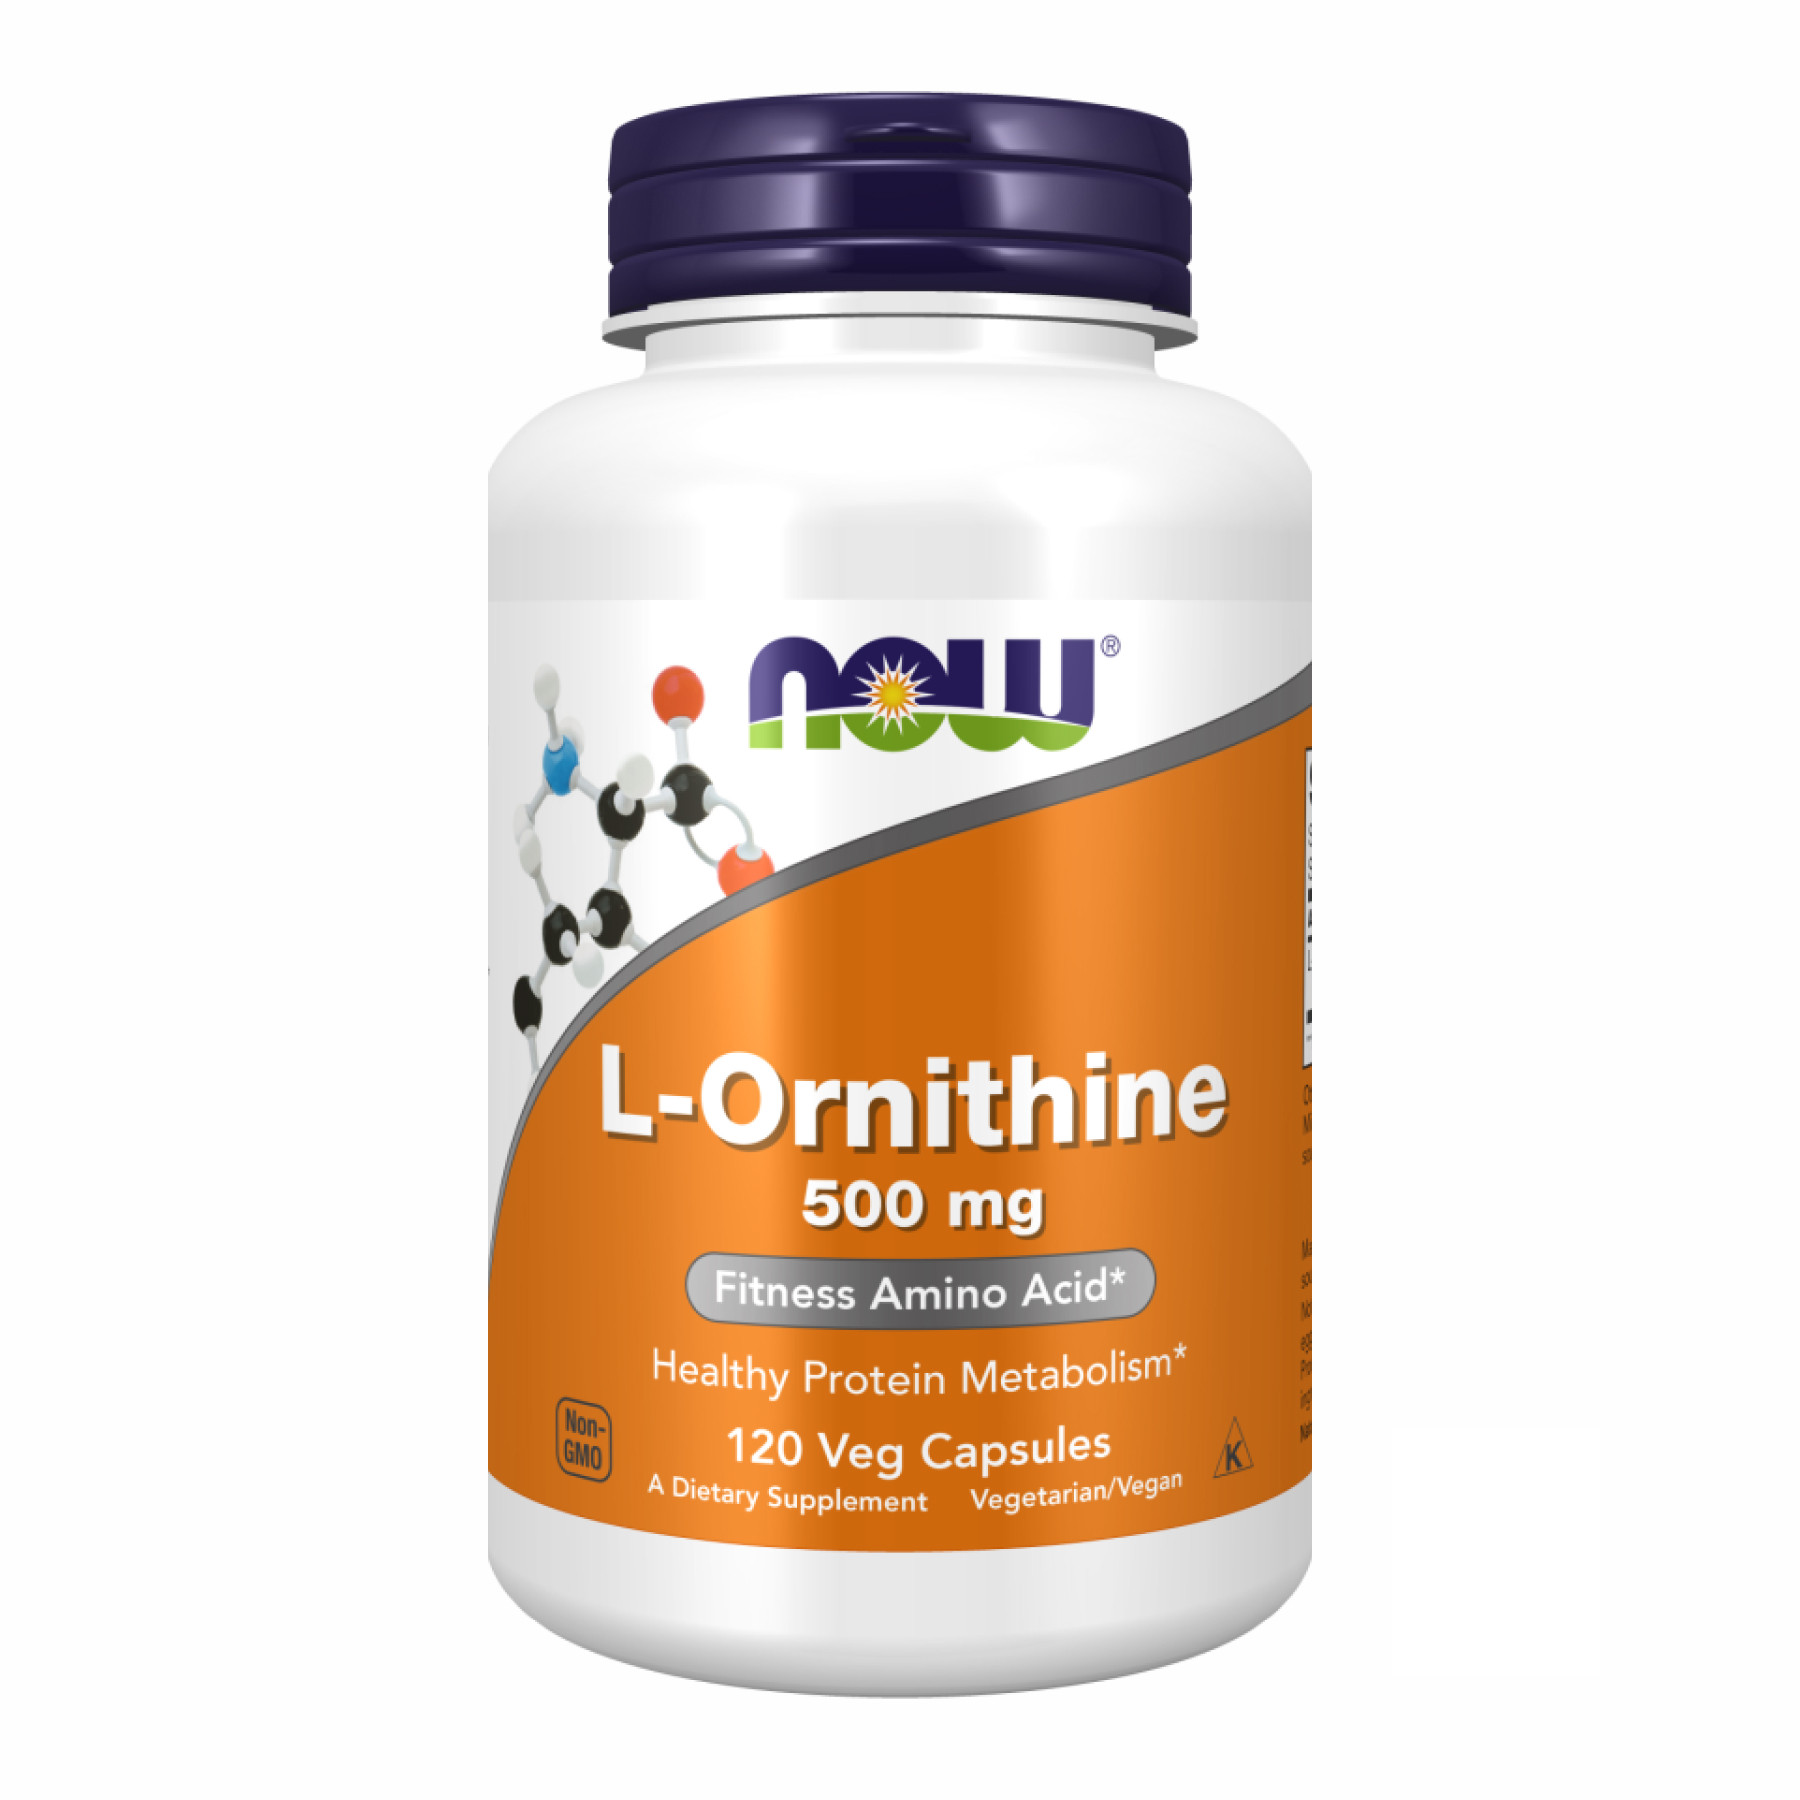 Капсули ORNITHINE 500mg - 120 vcaps 2022-09-1171